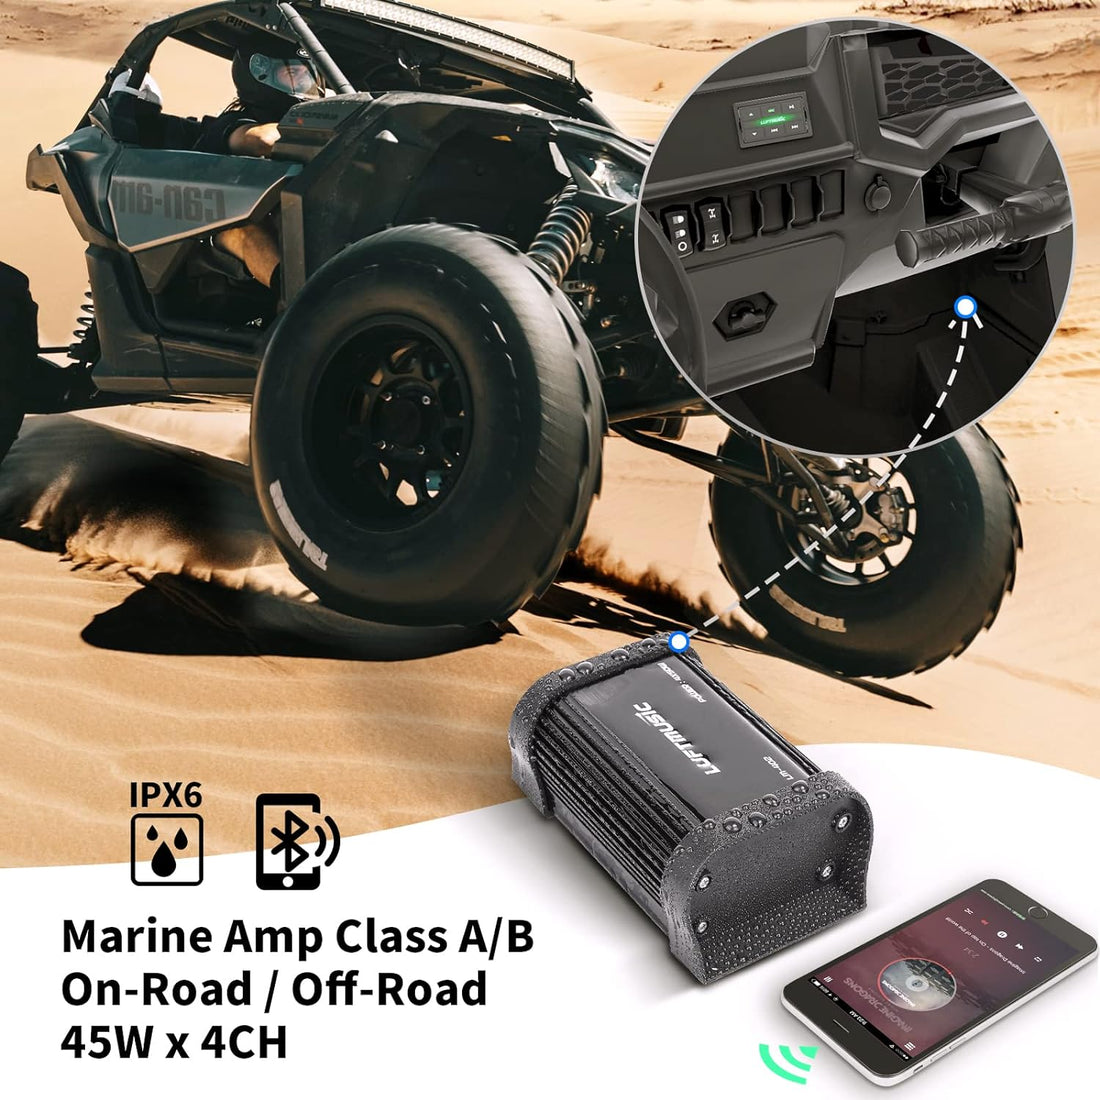 Marine Bluetooth Amplifier Marine Amp Full Range, Class A/B, Wireless Remote Controller, Aux-in, USB-in for Bikes, Motorcycle, Golf Cart, ATV, RZR, Tractor, Hot Tub